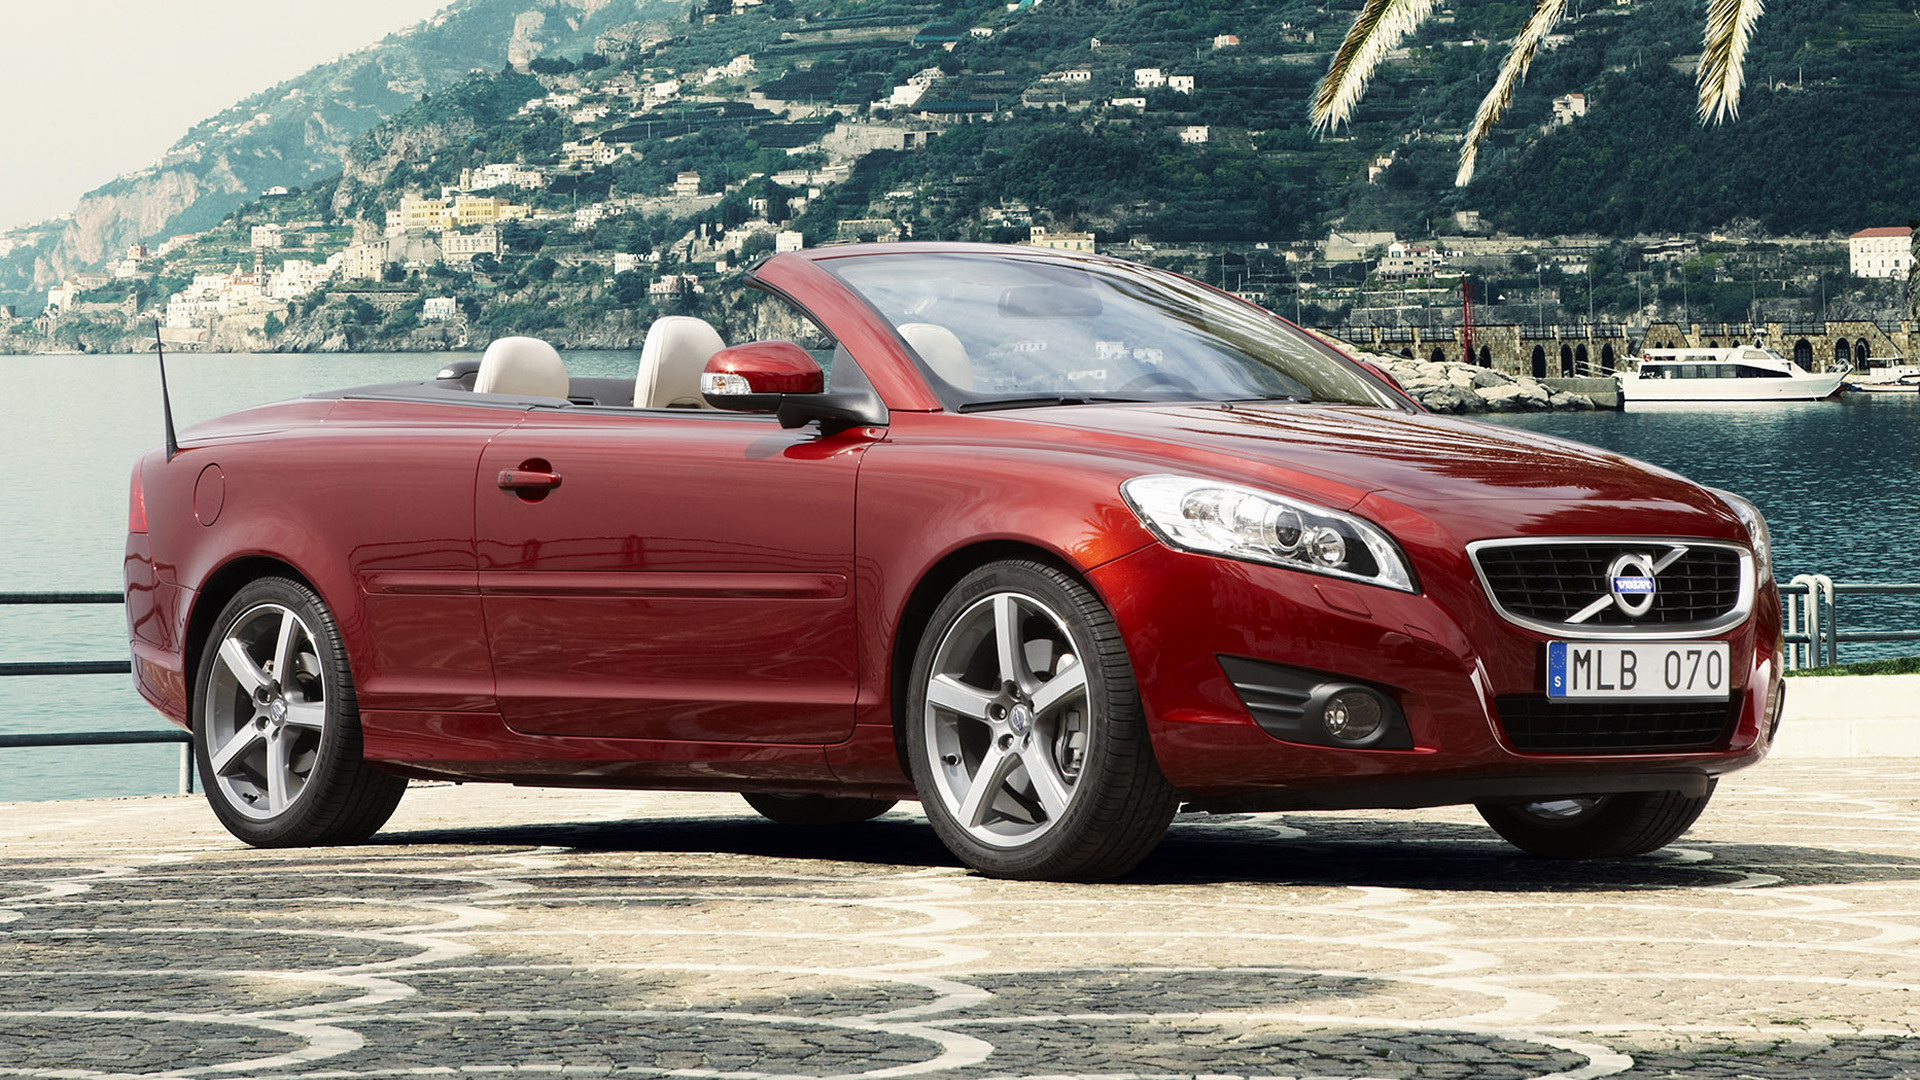 Compact Car Convertible Luxury Car Red Car Volvo C70 1920x1080